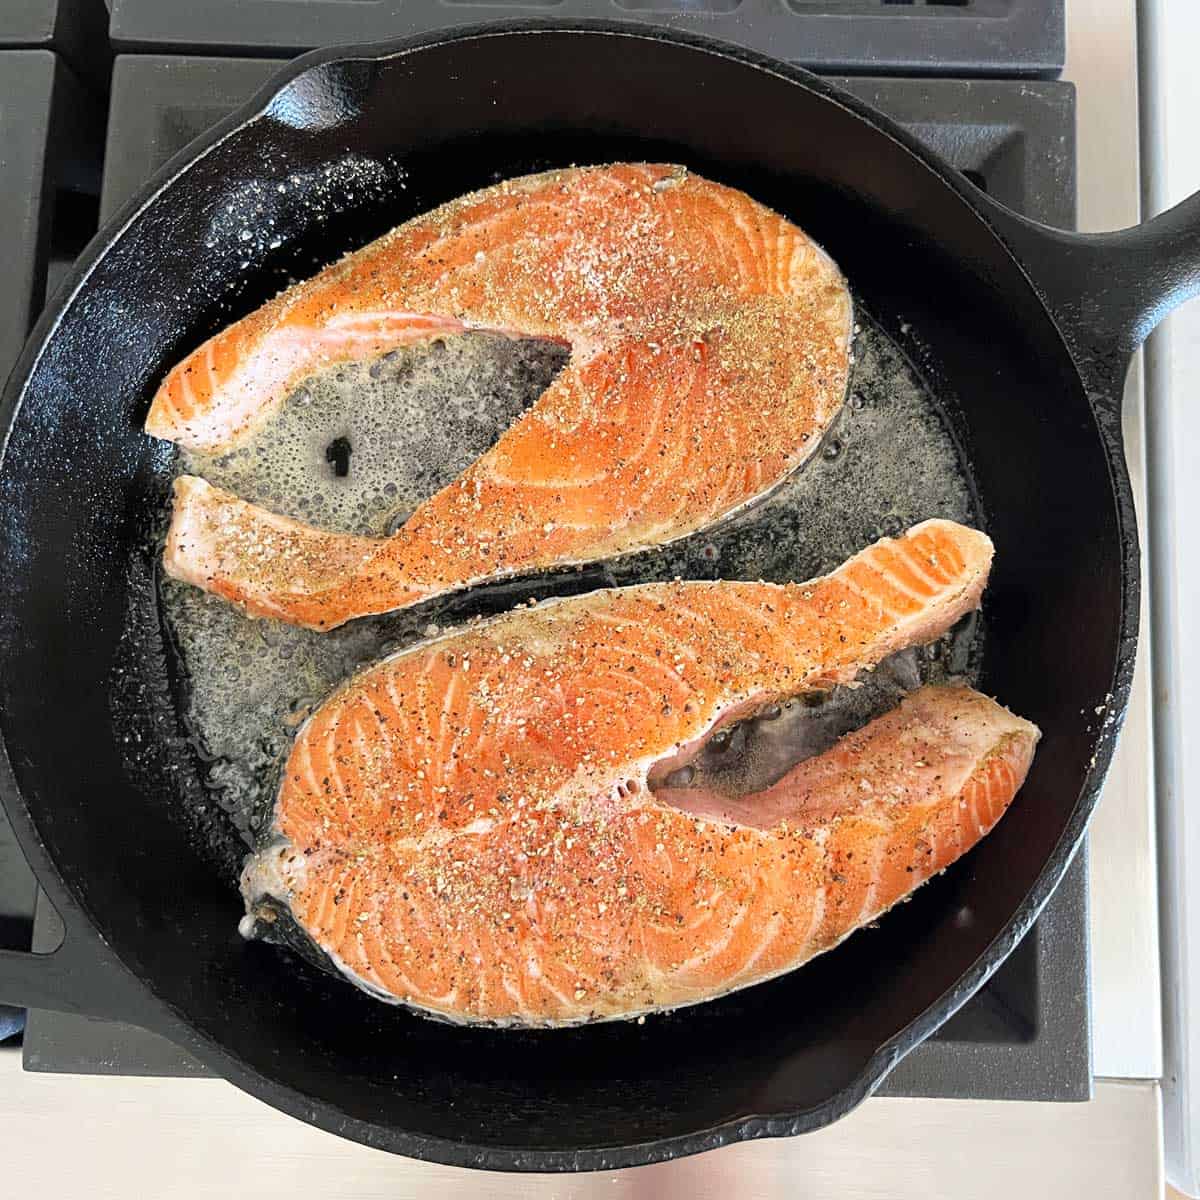 Two salmon steaks are cooking in a cast-iron skillet.